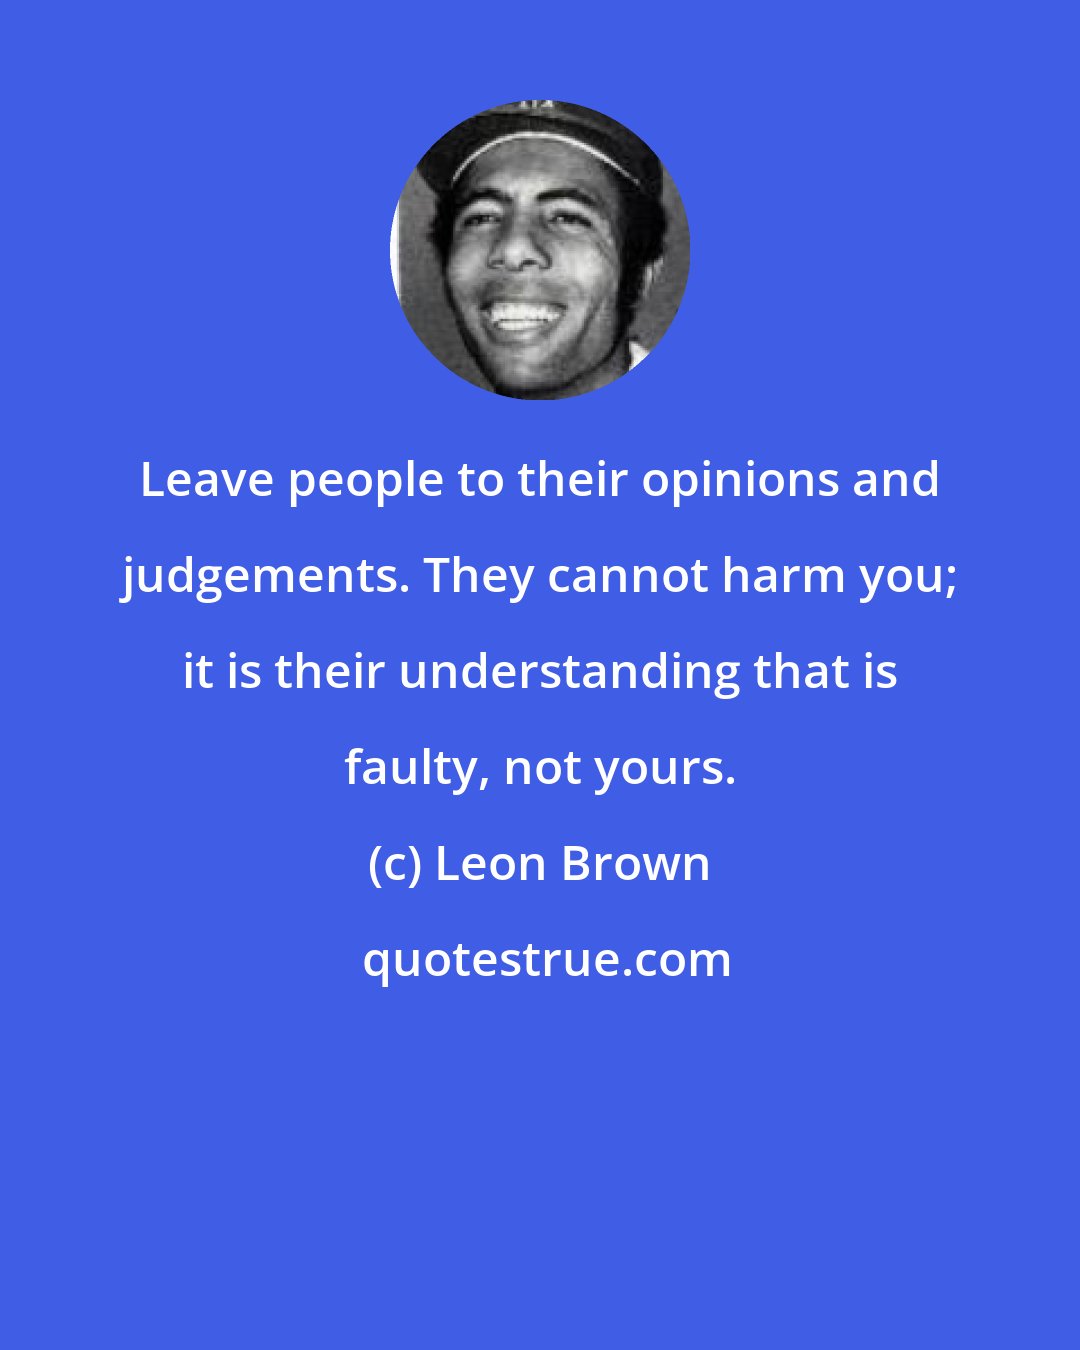 Leon Brown: Leave people to their opinions and judgements. They cannot harm you; it is their understanding that is faulty, not yours.